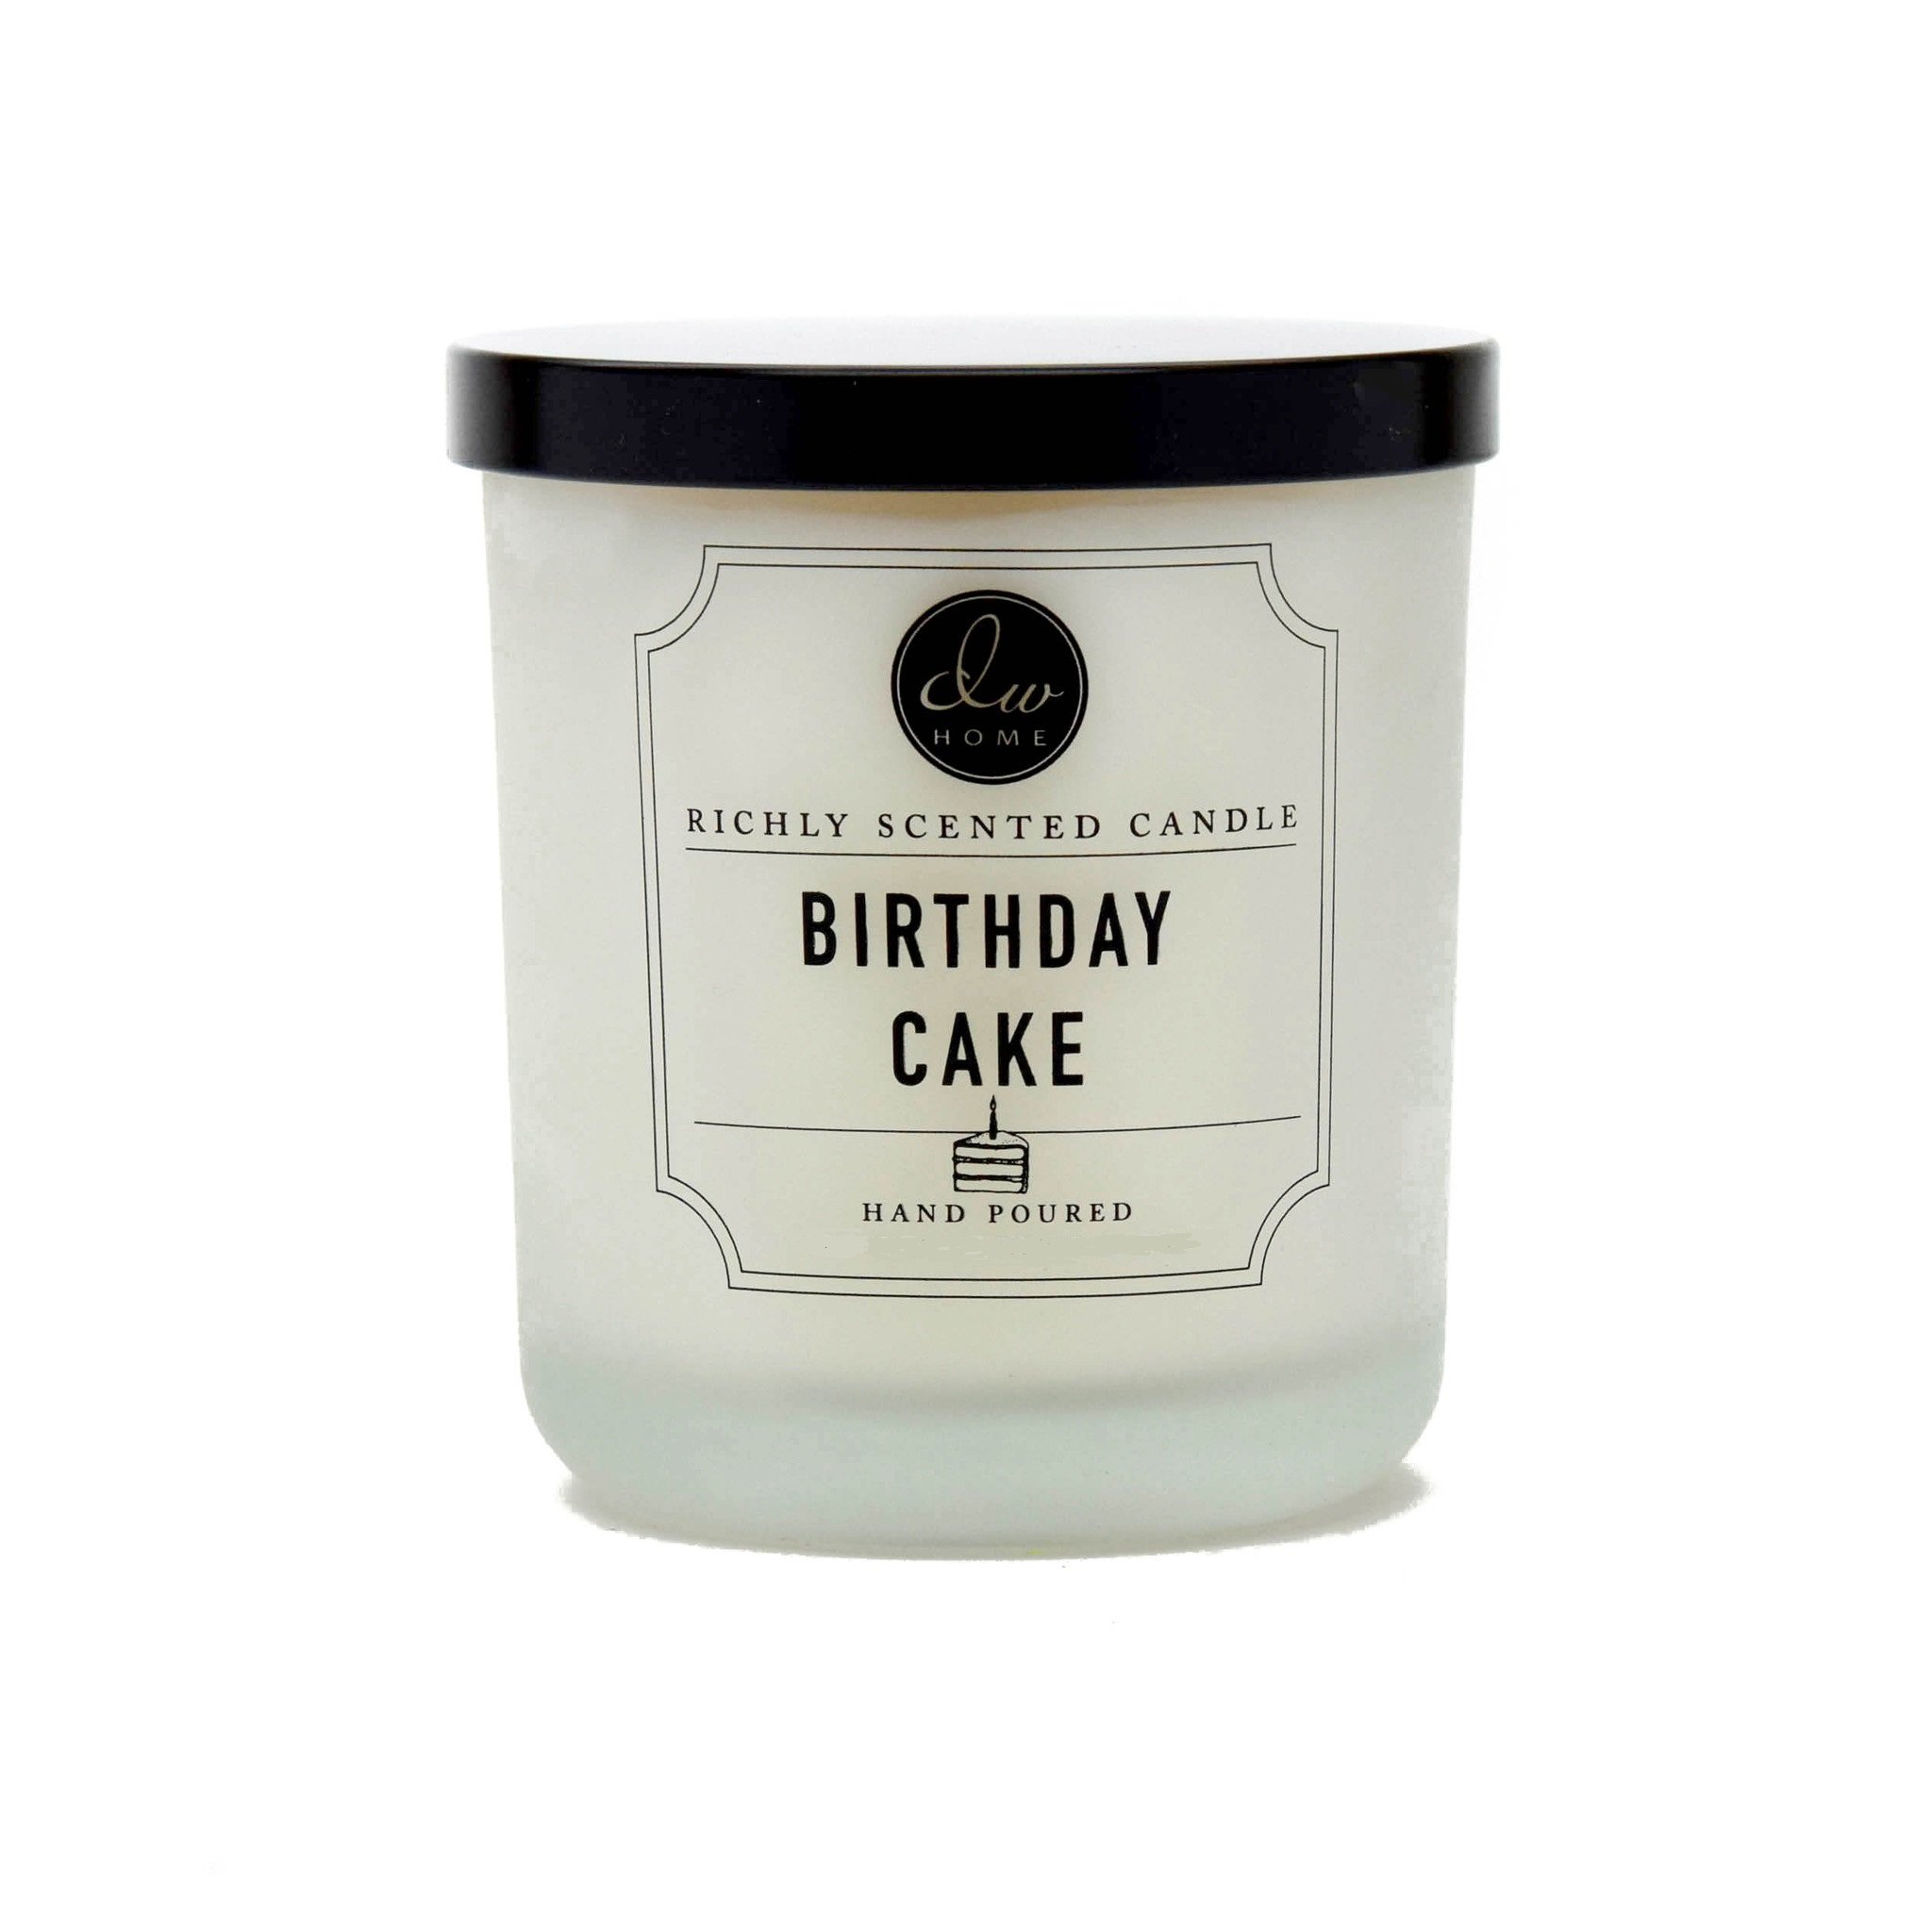 Dw Home Birthday Cake Richly Scented Candle Small Single Wick Hand Poured 4 Oz